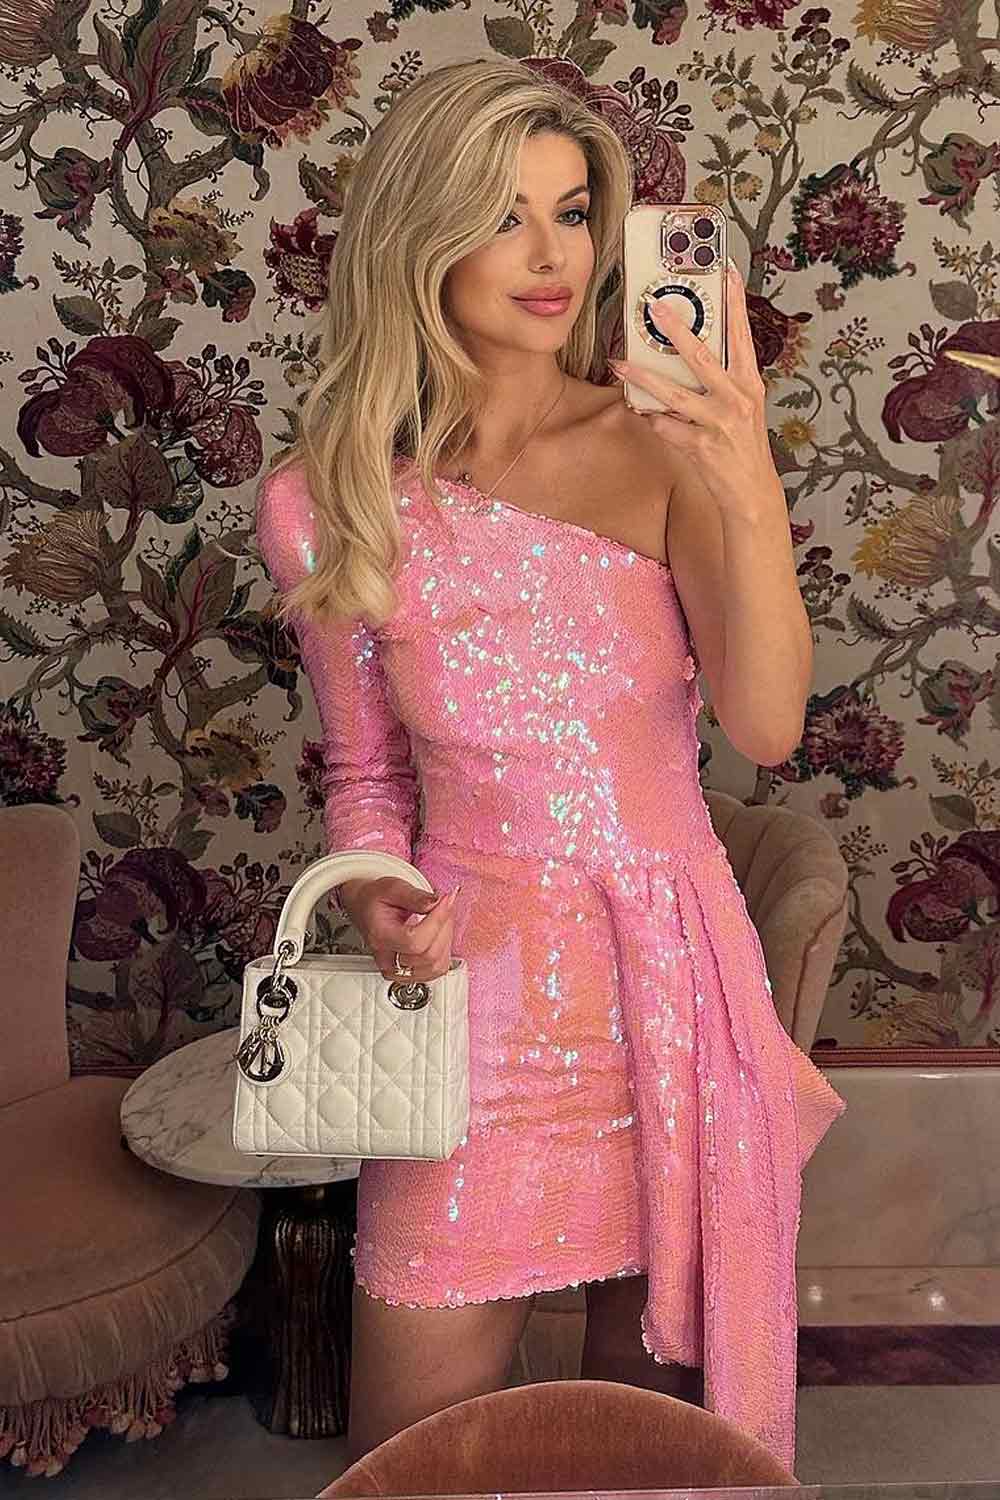 Barbie Halloween Costume with One Shoulder Sparkly Dress